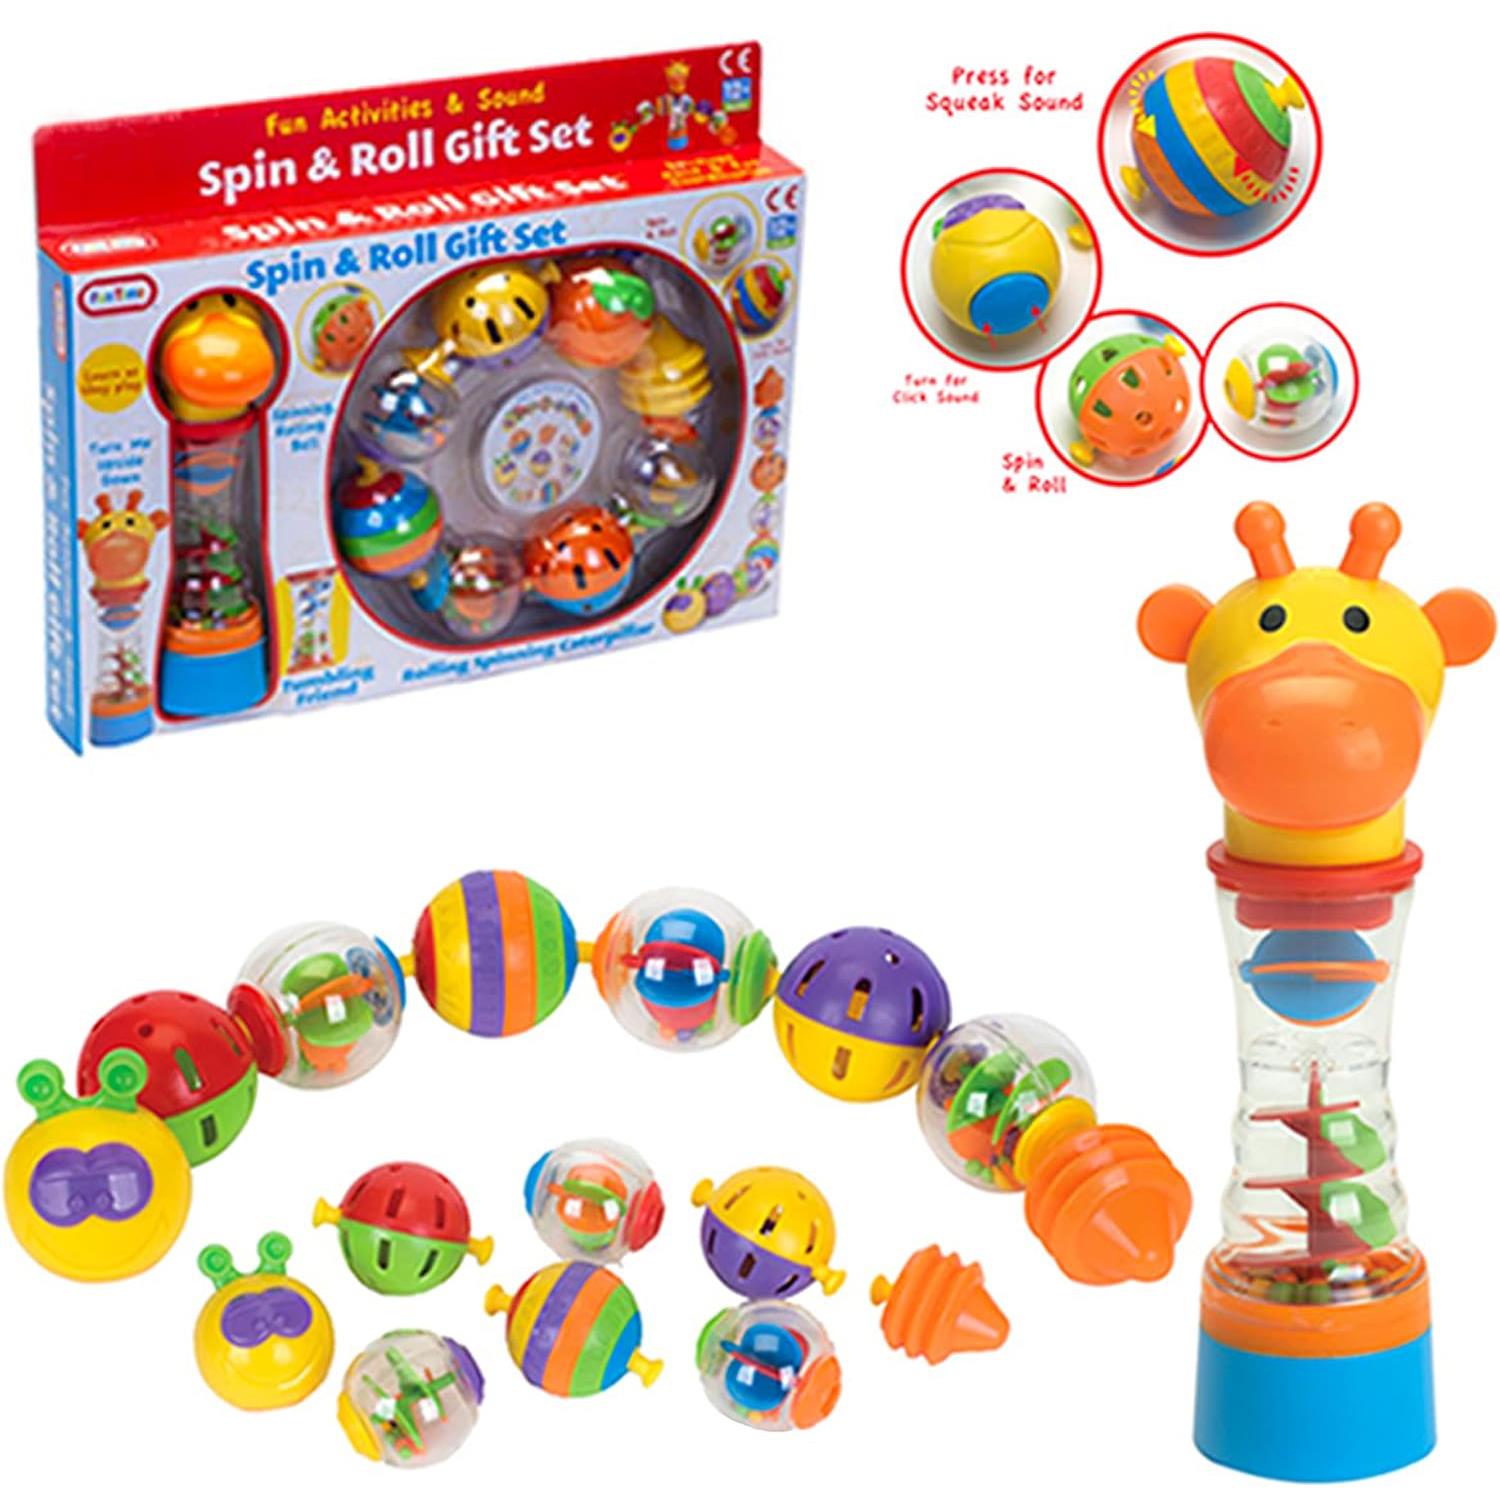 The Magic Toy Shop Toy Spin & Roll Gift Set with Fun Activates & Sound rolling spinning caterpillar